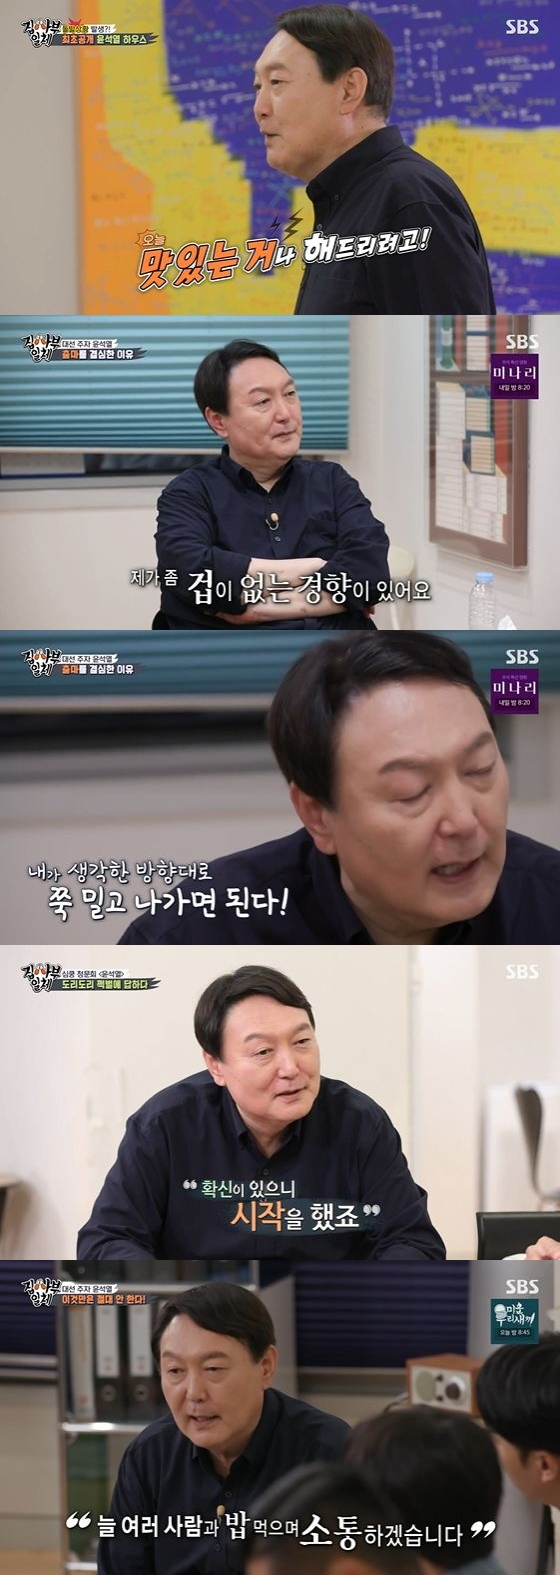 On SBS entertainment All The Butlers broadcasted on the afternoon of the 19th, Yoon Seok-ryul appeared as the first guest of the presidential big 3 feature.On that day, Yoon Seok-ryul invited members to his home.Yoon Seok-ryul showed pride in cooking, saying, I want to do something delicious. He showed off his high level of cooking skills from kimchi stew, bulgogi and egg rolls.Lee Seung-gi admired, saying, The heart of food is about the type of deformed. I think you forgot the broadcast.Yoon Seok-ryul said to the members who have difficulty in naming, Call me brother, I have been quitting the president for a long time.Then, Actor Joo Hyun Sung Dae mocked and attracted attention.Yoon Seok-ryul also showed coolness about sensitive questions: When asked if Yang Se-hyeong retired for the challenge of the presidency, Yoon Seok-ryul said, No.The two-year term is a promise, so I have to finish it, but it was humiliating to sit there anymore.I have never done politics, and it is not normal, he said, I have decided to run for the presidency in May after retiring for a while.Yoon Seok-ryul added: When you do something new, you tend to be fearless; you have a lot of things to lack, but you just have to push in the direction you think youre not giving up.I am confident about that. Yoon Seok-ryul also showed confidence in the hearings with members; Yoon Seok-ryul said of the concern that he had little political experience: I learned to skate when I was a kid.When I say bow and turn, I am a person who bends and turns 30 times. He said, I am confident in making any new work successful. Meanwhile, Yoon Seok-ryul responded to Lee Jae-myung and Lee Nak-yeons desire to act, saying, I want to act meticulously for Lee Nak-yeon and I want to act for Lee Jae-myung.In addition, Yoon Seok-ryul proudly said yes to the question that the 20th president would be himself.Asked if there is anything that I will not do this, I emphasized the importance of communication, saying, I will never hide in front of the people without ever eating alone.